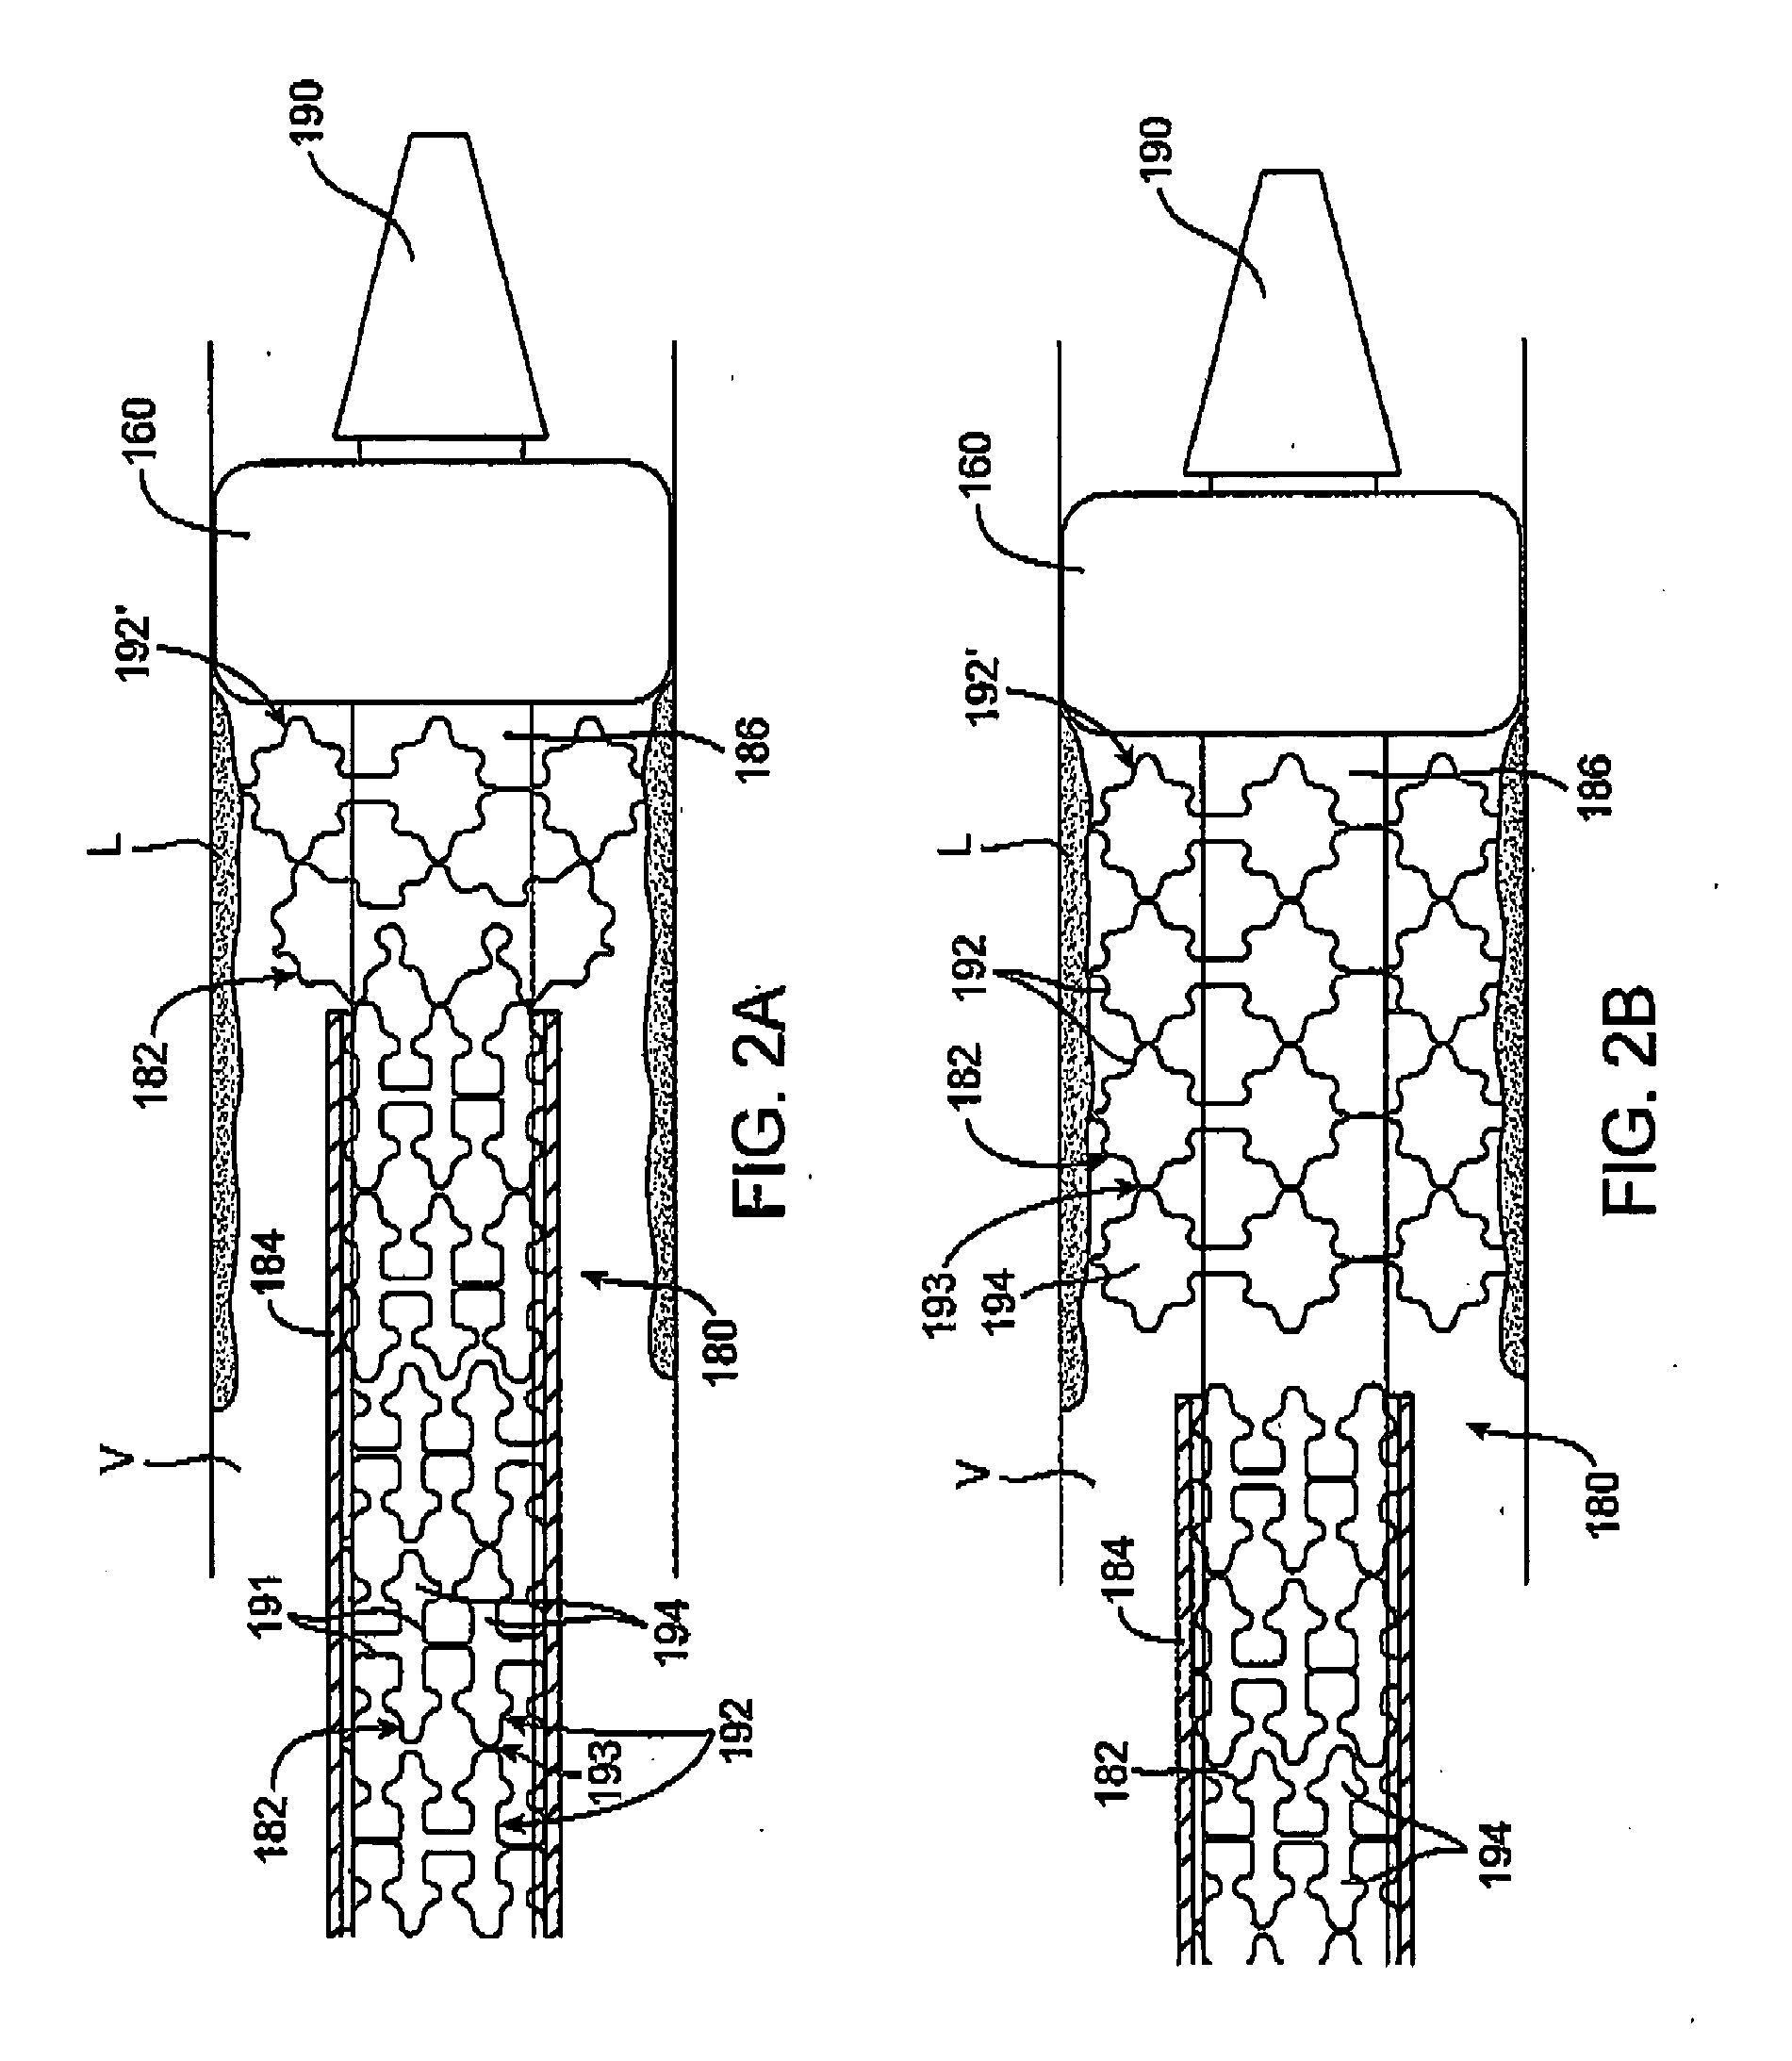 Custom-length self-expanding stent delivery systems with stent bumpers